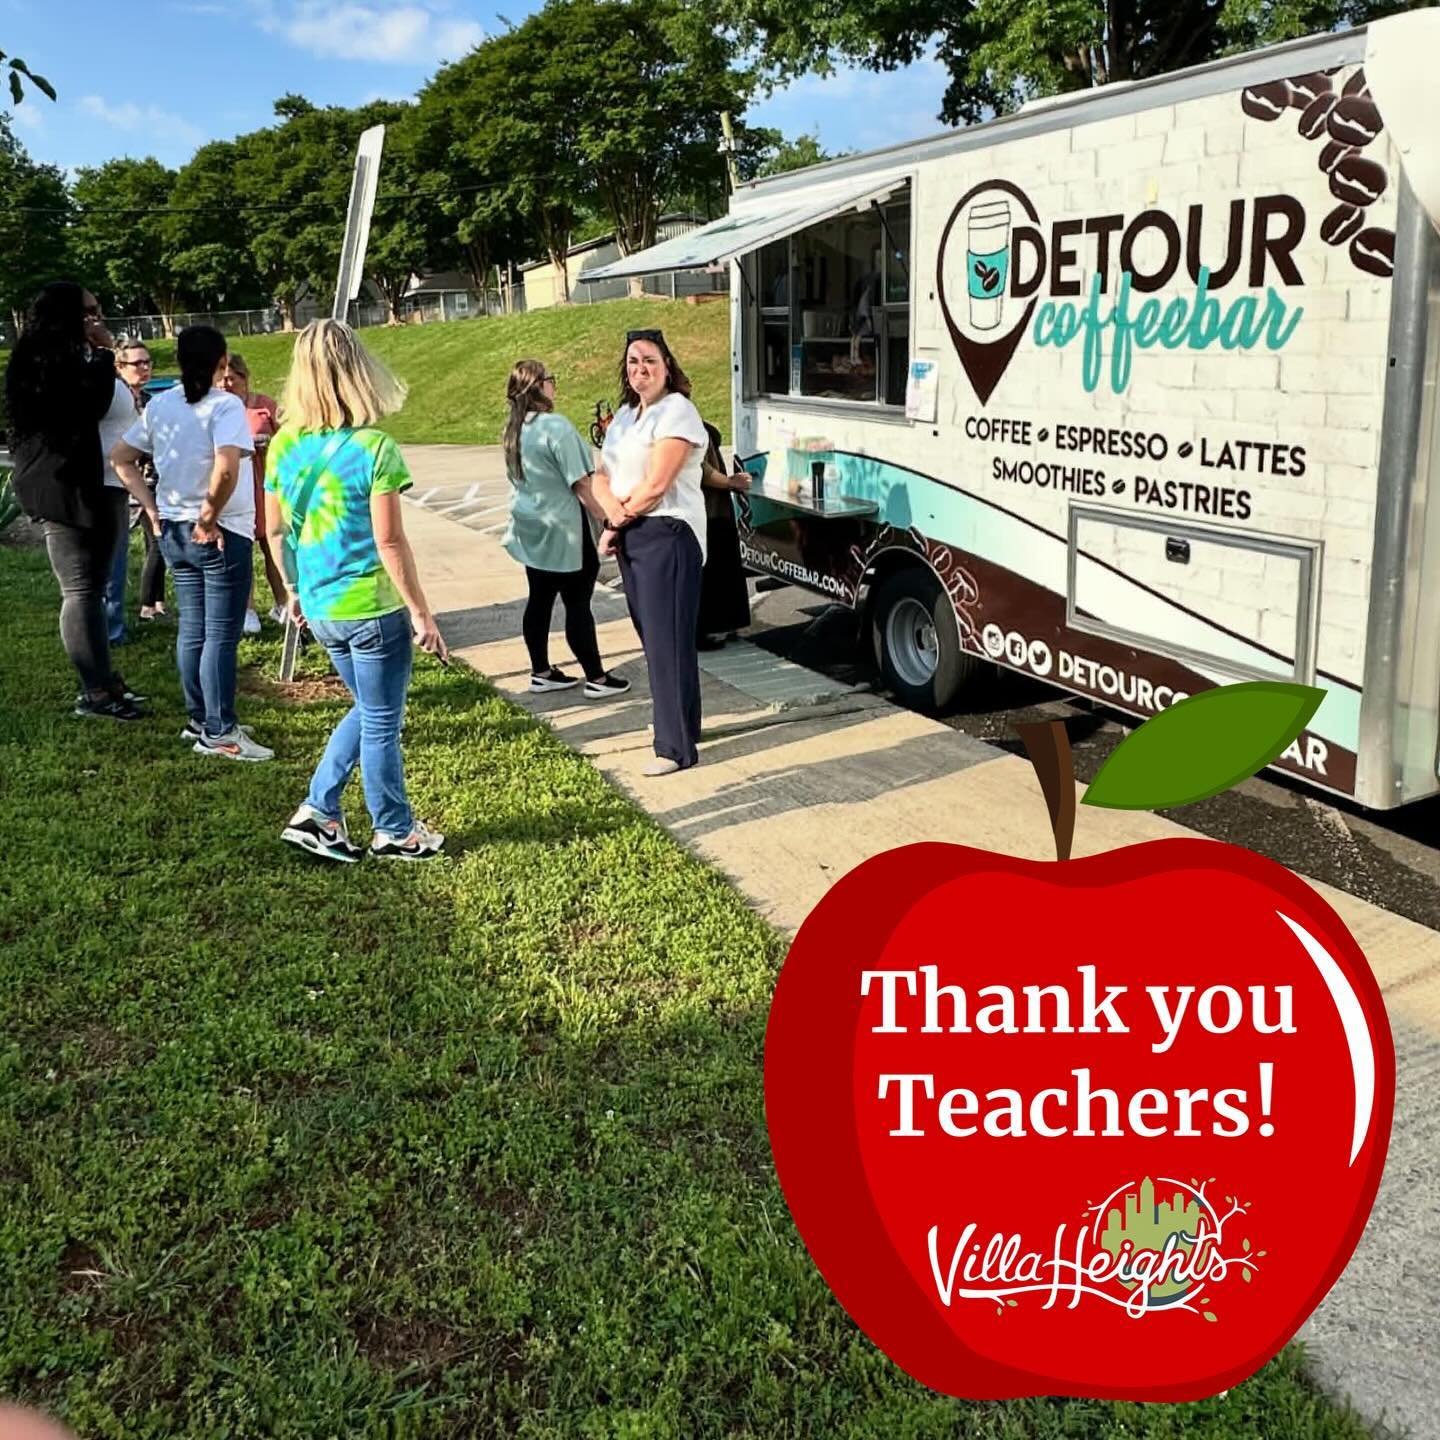 🍎 Happy Teacher Appreciation Week 🍏 

We&rsquo;re so happy to celebrate our @villaheightscms teachers this week!  Our community organization provided free coffee beverages to teachers and staff with the awesome @detourcoffeebar !! 

Big thanks to a